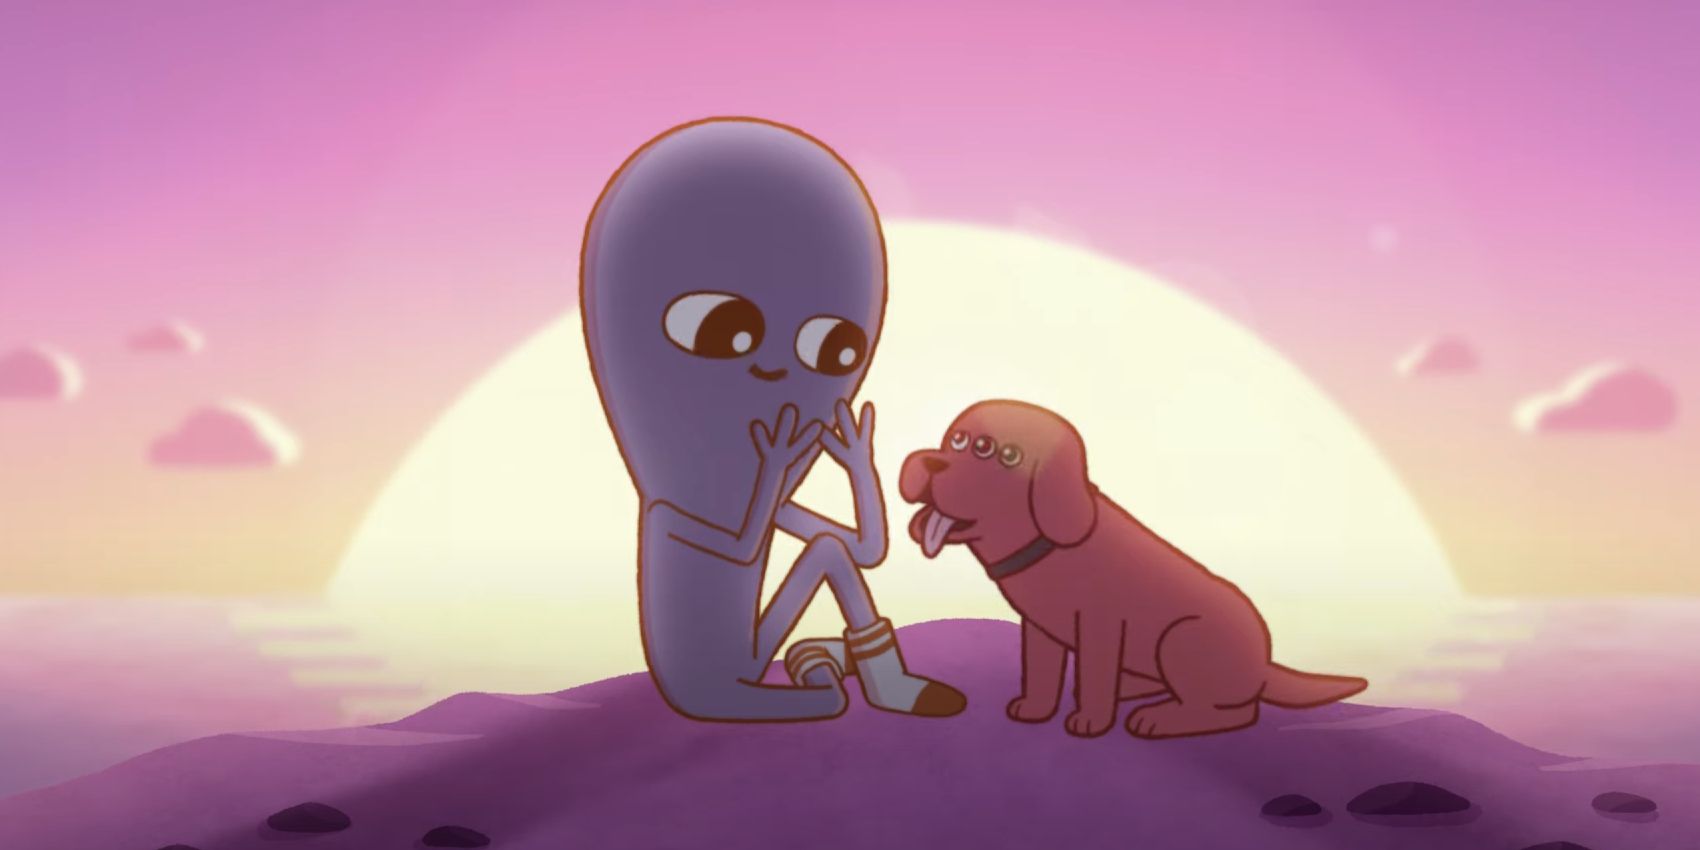 Blue alien looking at a three eyed dog in Strange Planet animated series